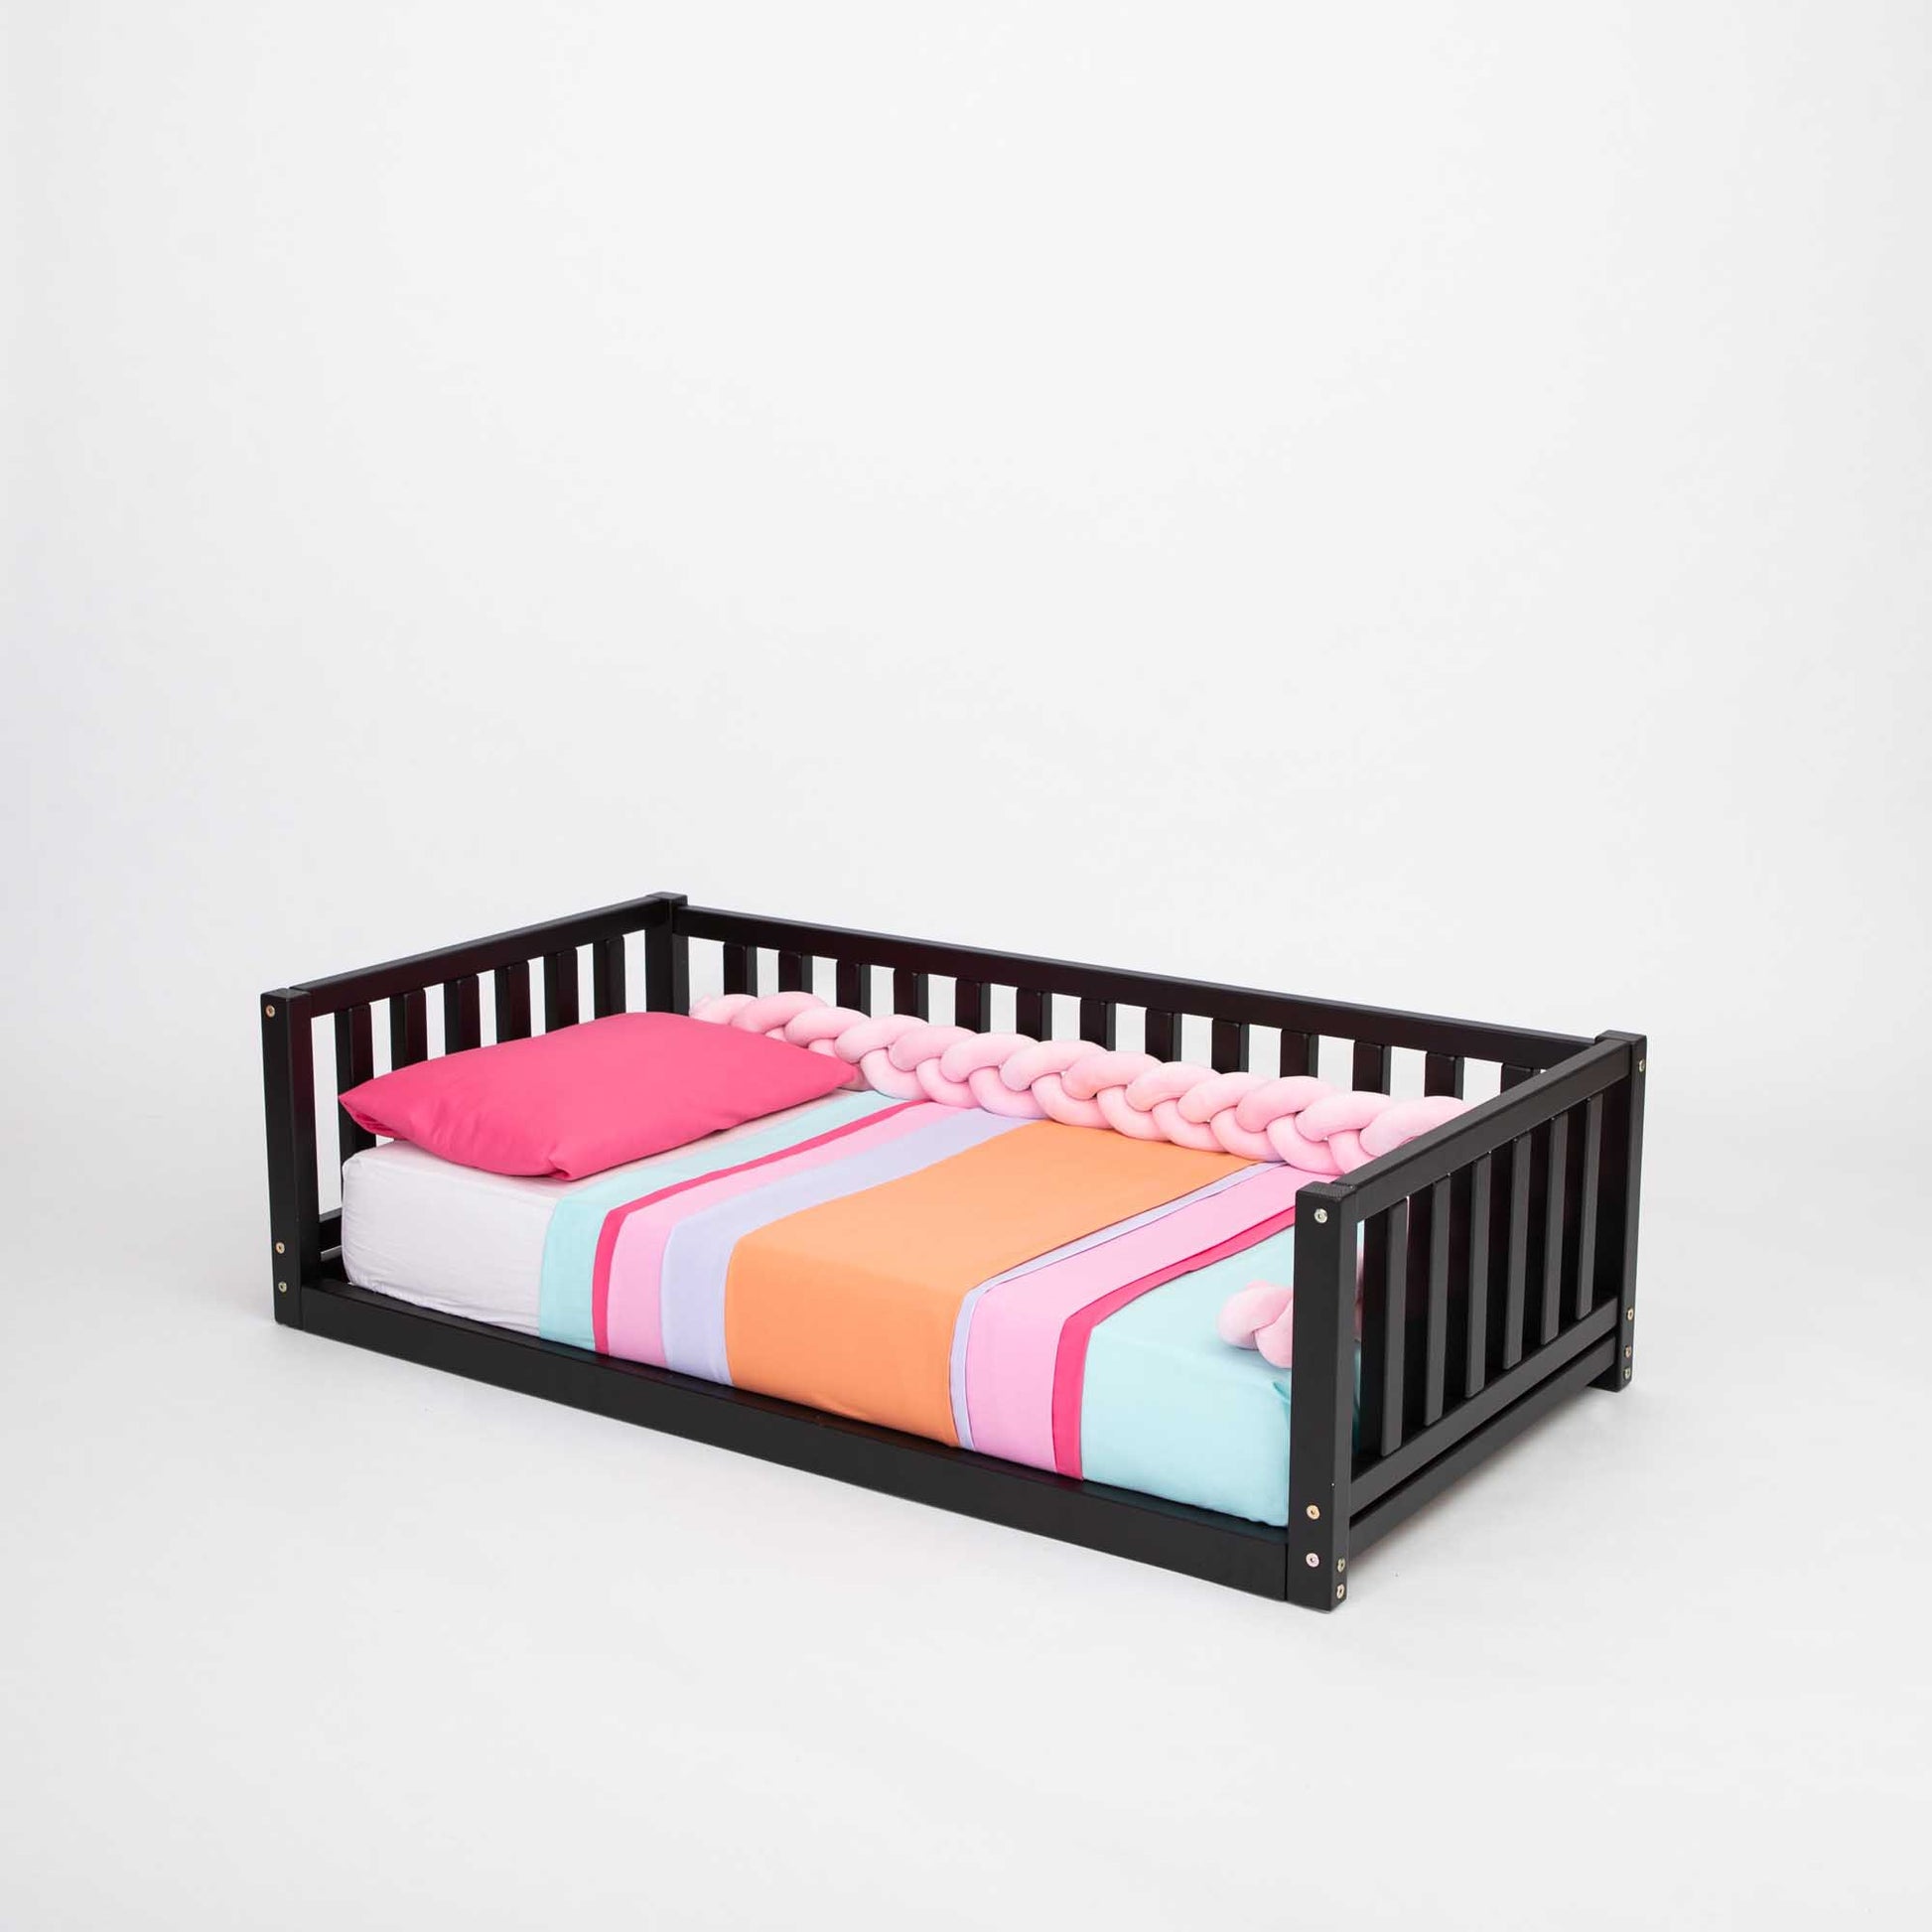 A Montessori bed with 3-sided rails from Sweet Home From Wood, perfect for kids.